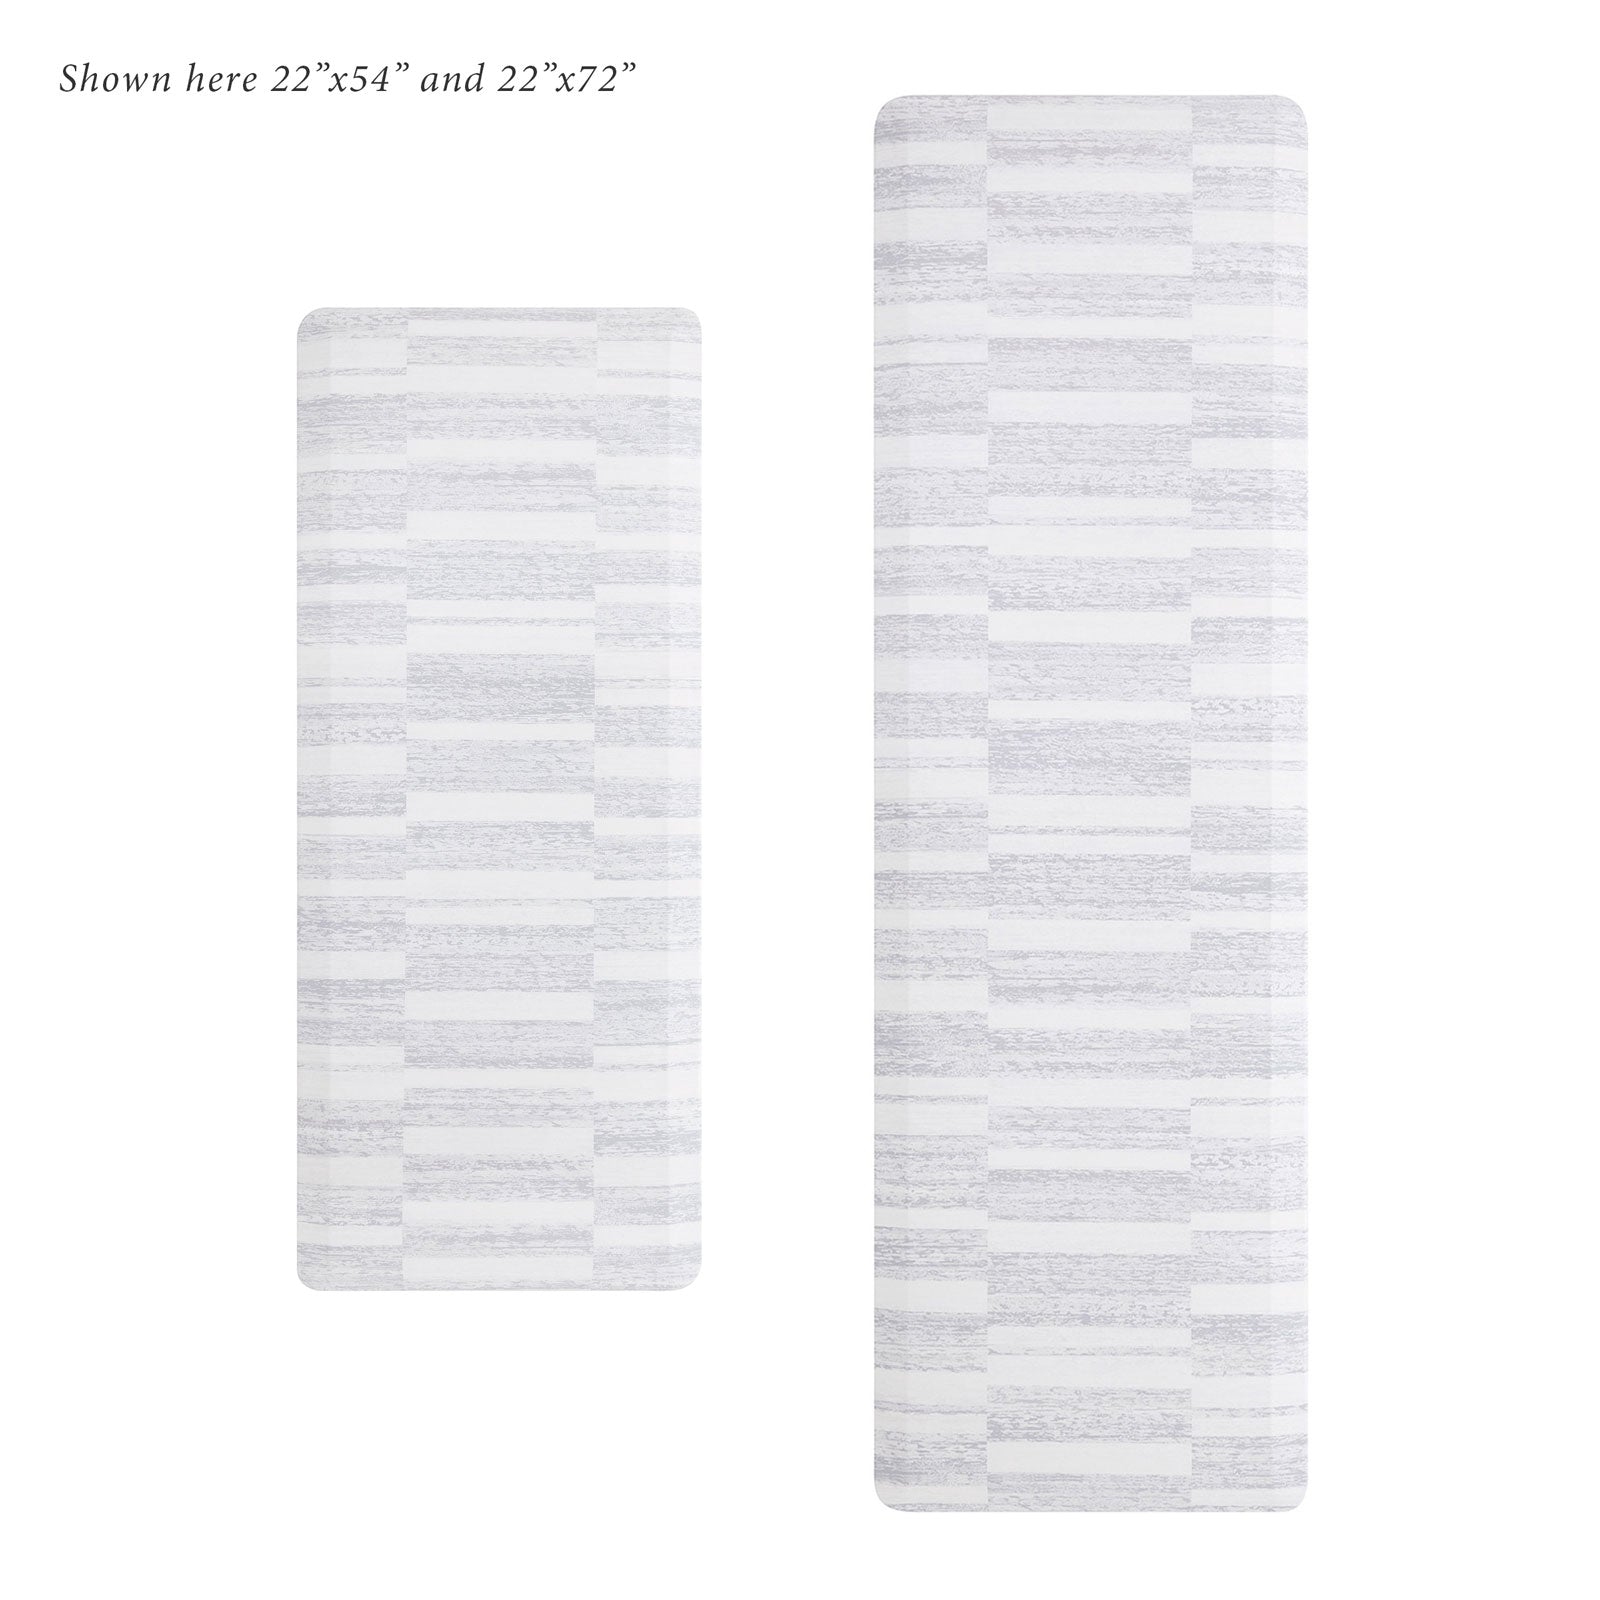 Overhead image of sutton stripe heather gray and white inverted stripe standing mat shown in size 22x54 and 22x72